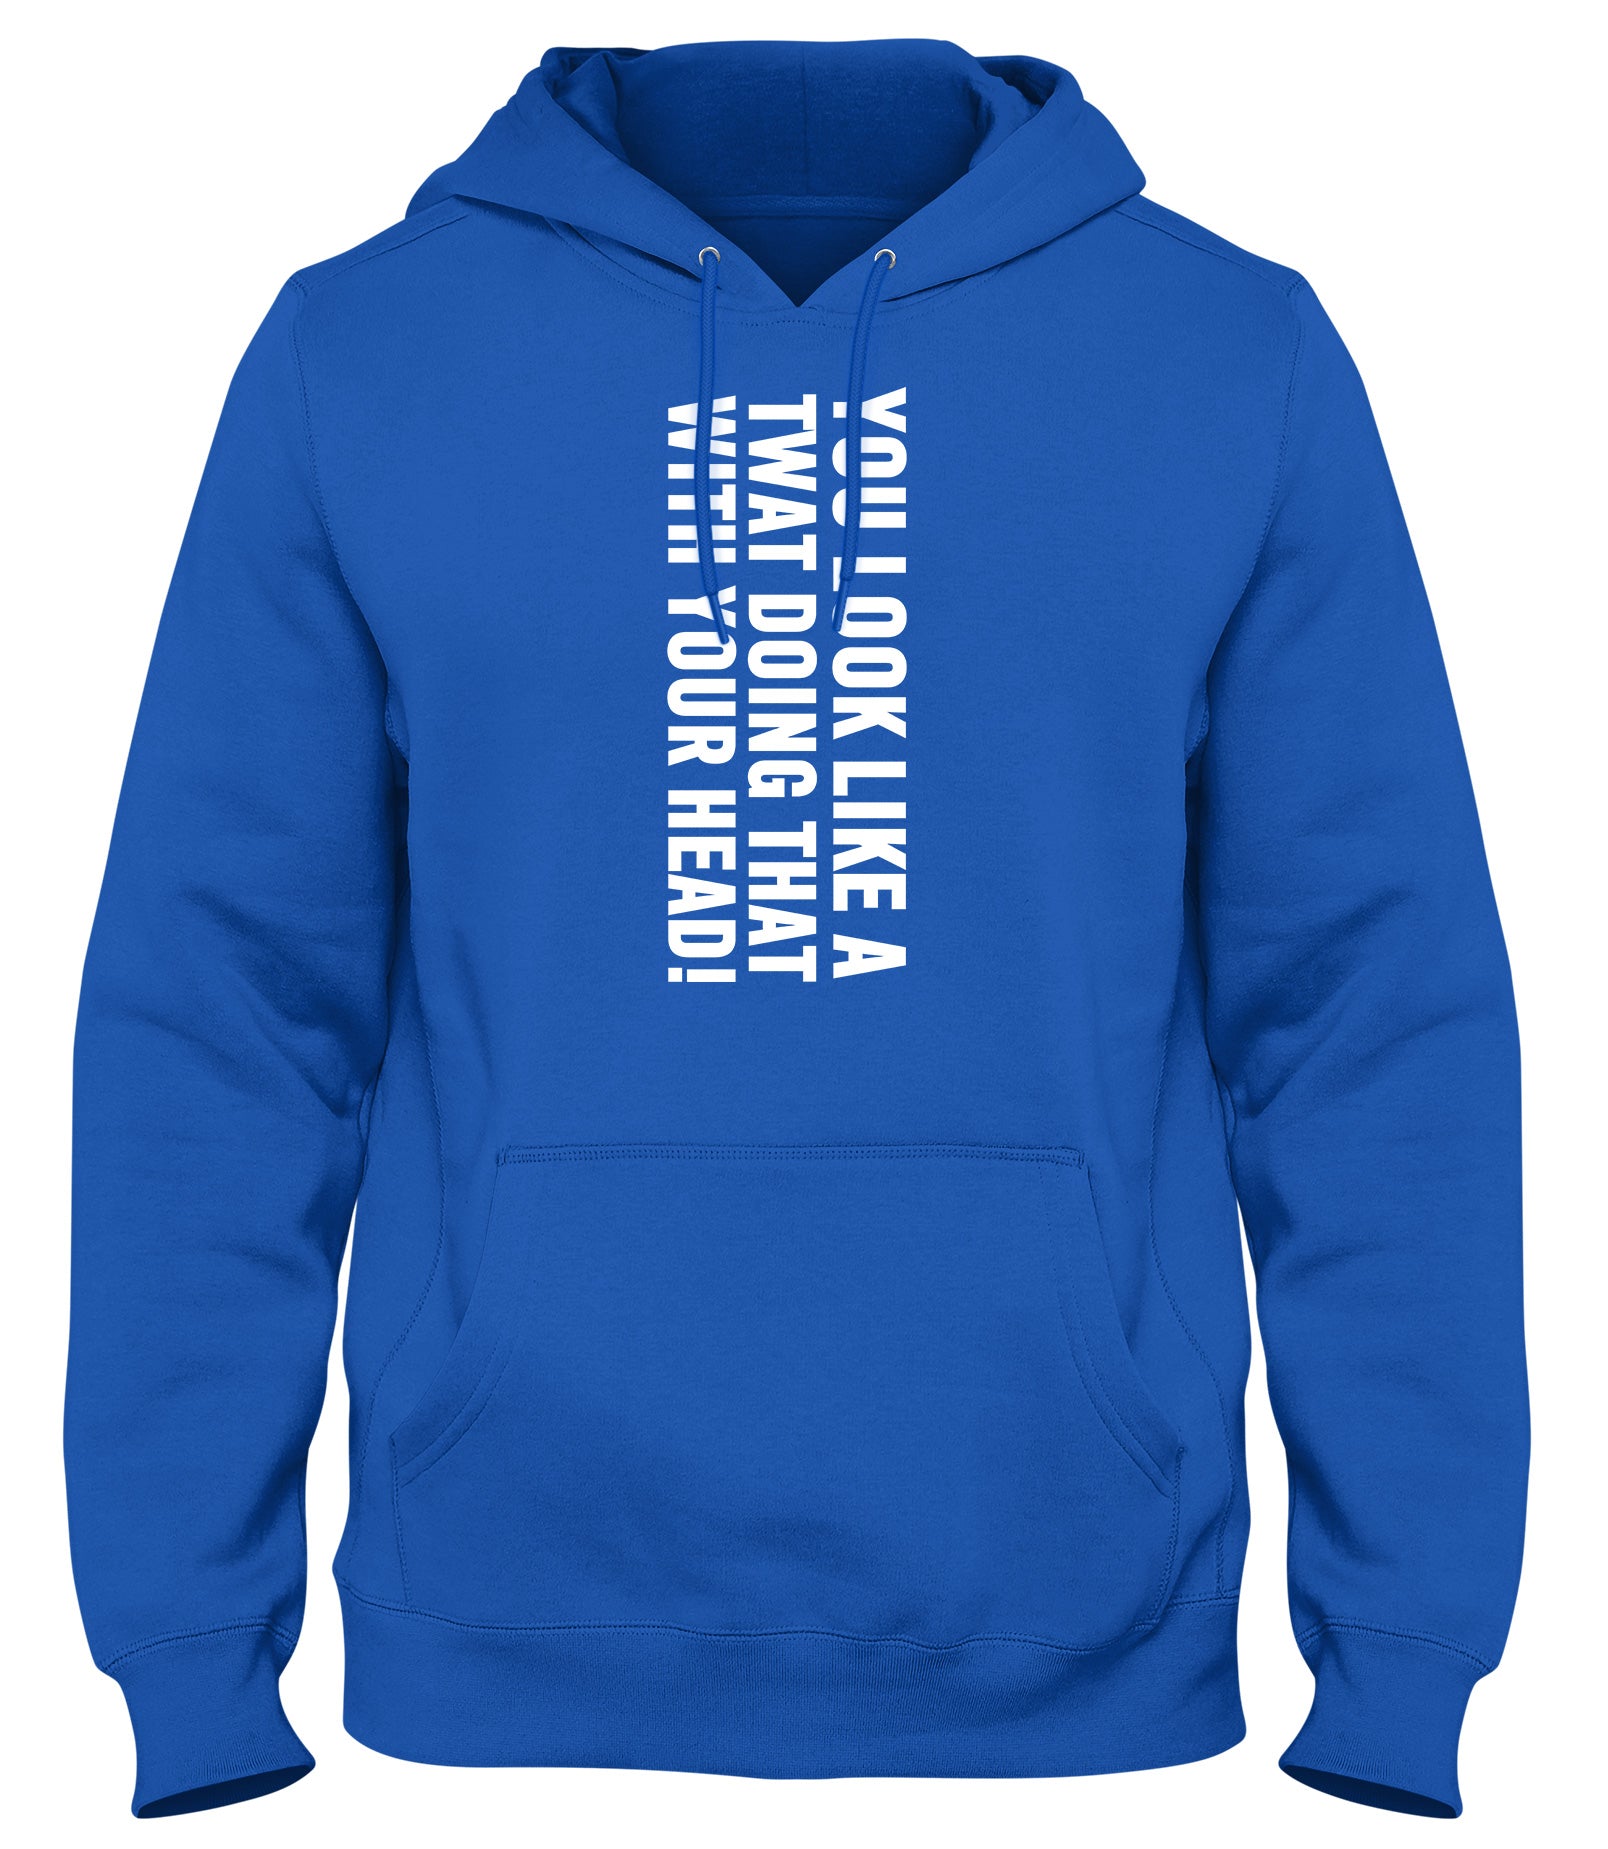 YOU LOOK LIKE A TWAT DOING THAT WITH YOUR HEAD MENS WOMENS LADIES UNISEX FUNNY SLOGAN HOODIE